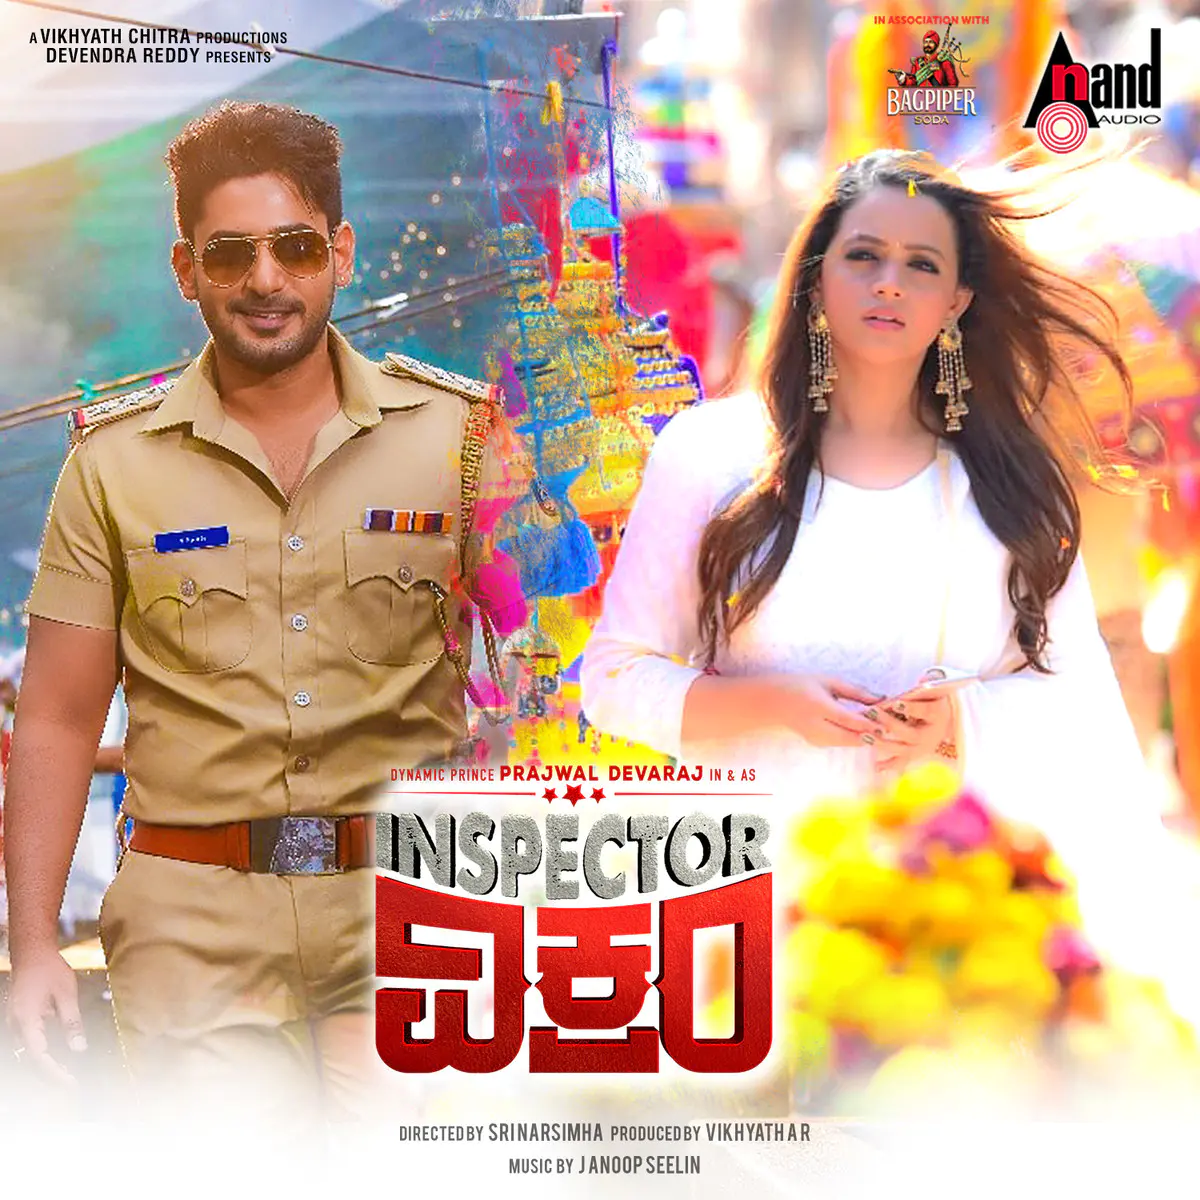 Nannavale Nannavale Lyrics In Kannada Inspector Vikram Nannavale Nannavale Song Lyrics In English Free Online On Gaana Com With music streaming on deezer you can discover more than 56 million tracks, create your own playlists, and share your favorite tracks with your friends. nannavale nannavale lyrics in kannada